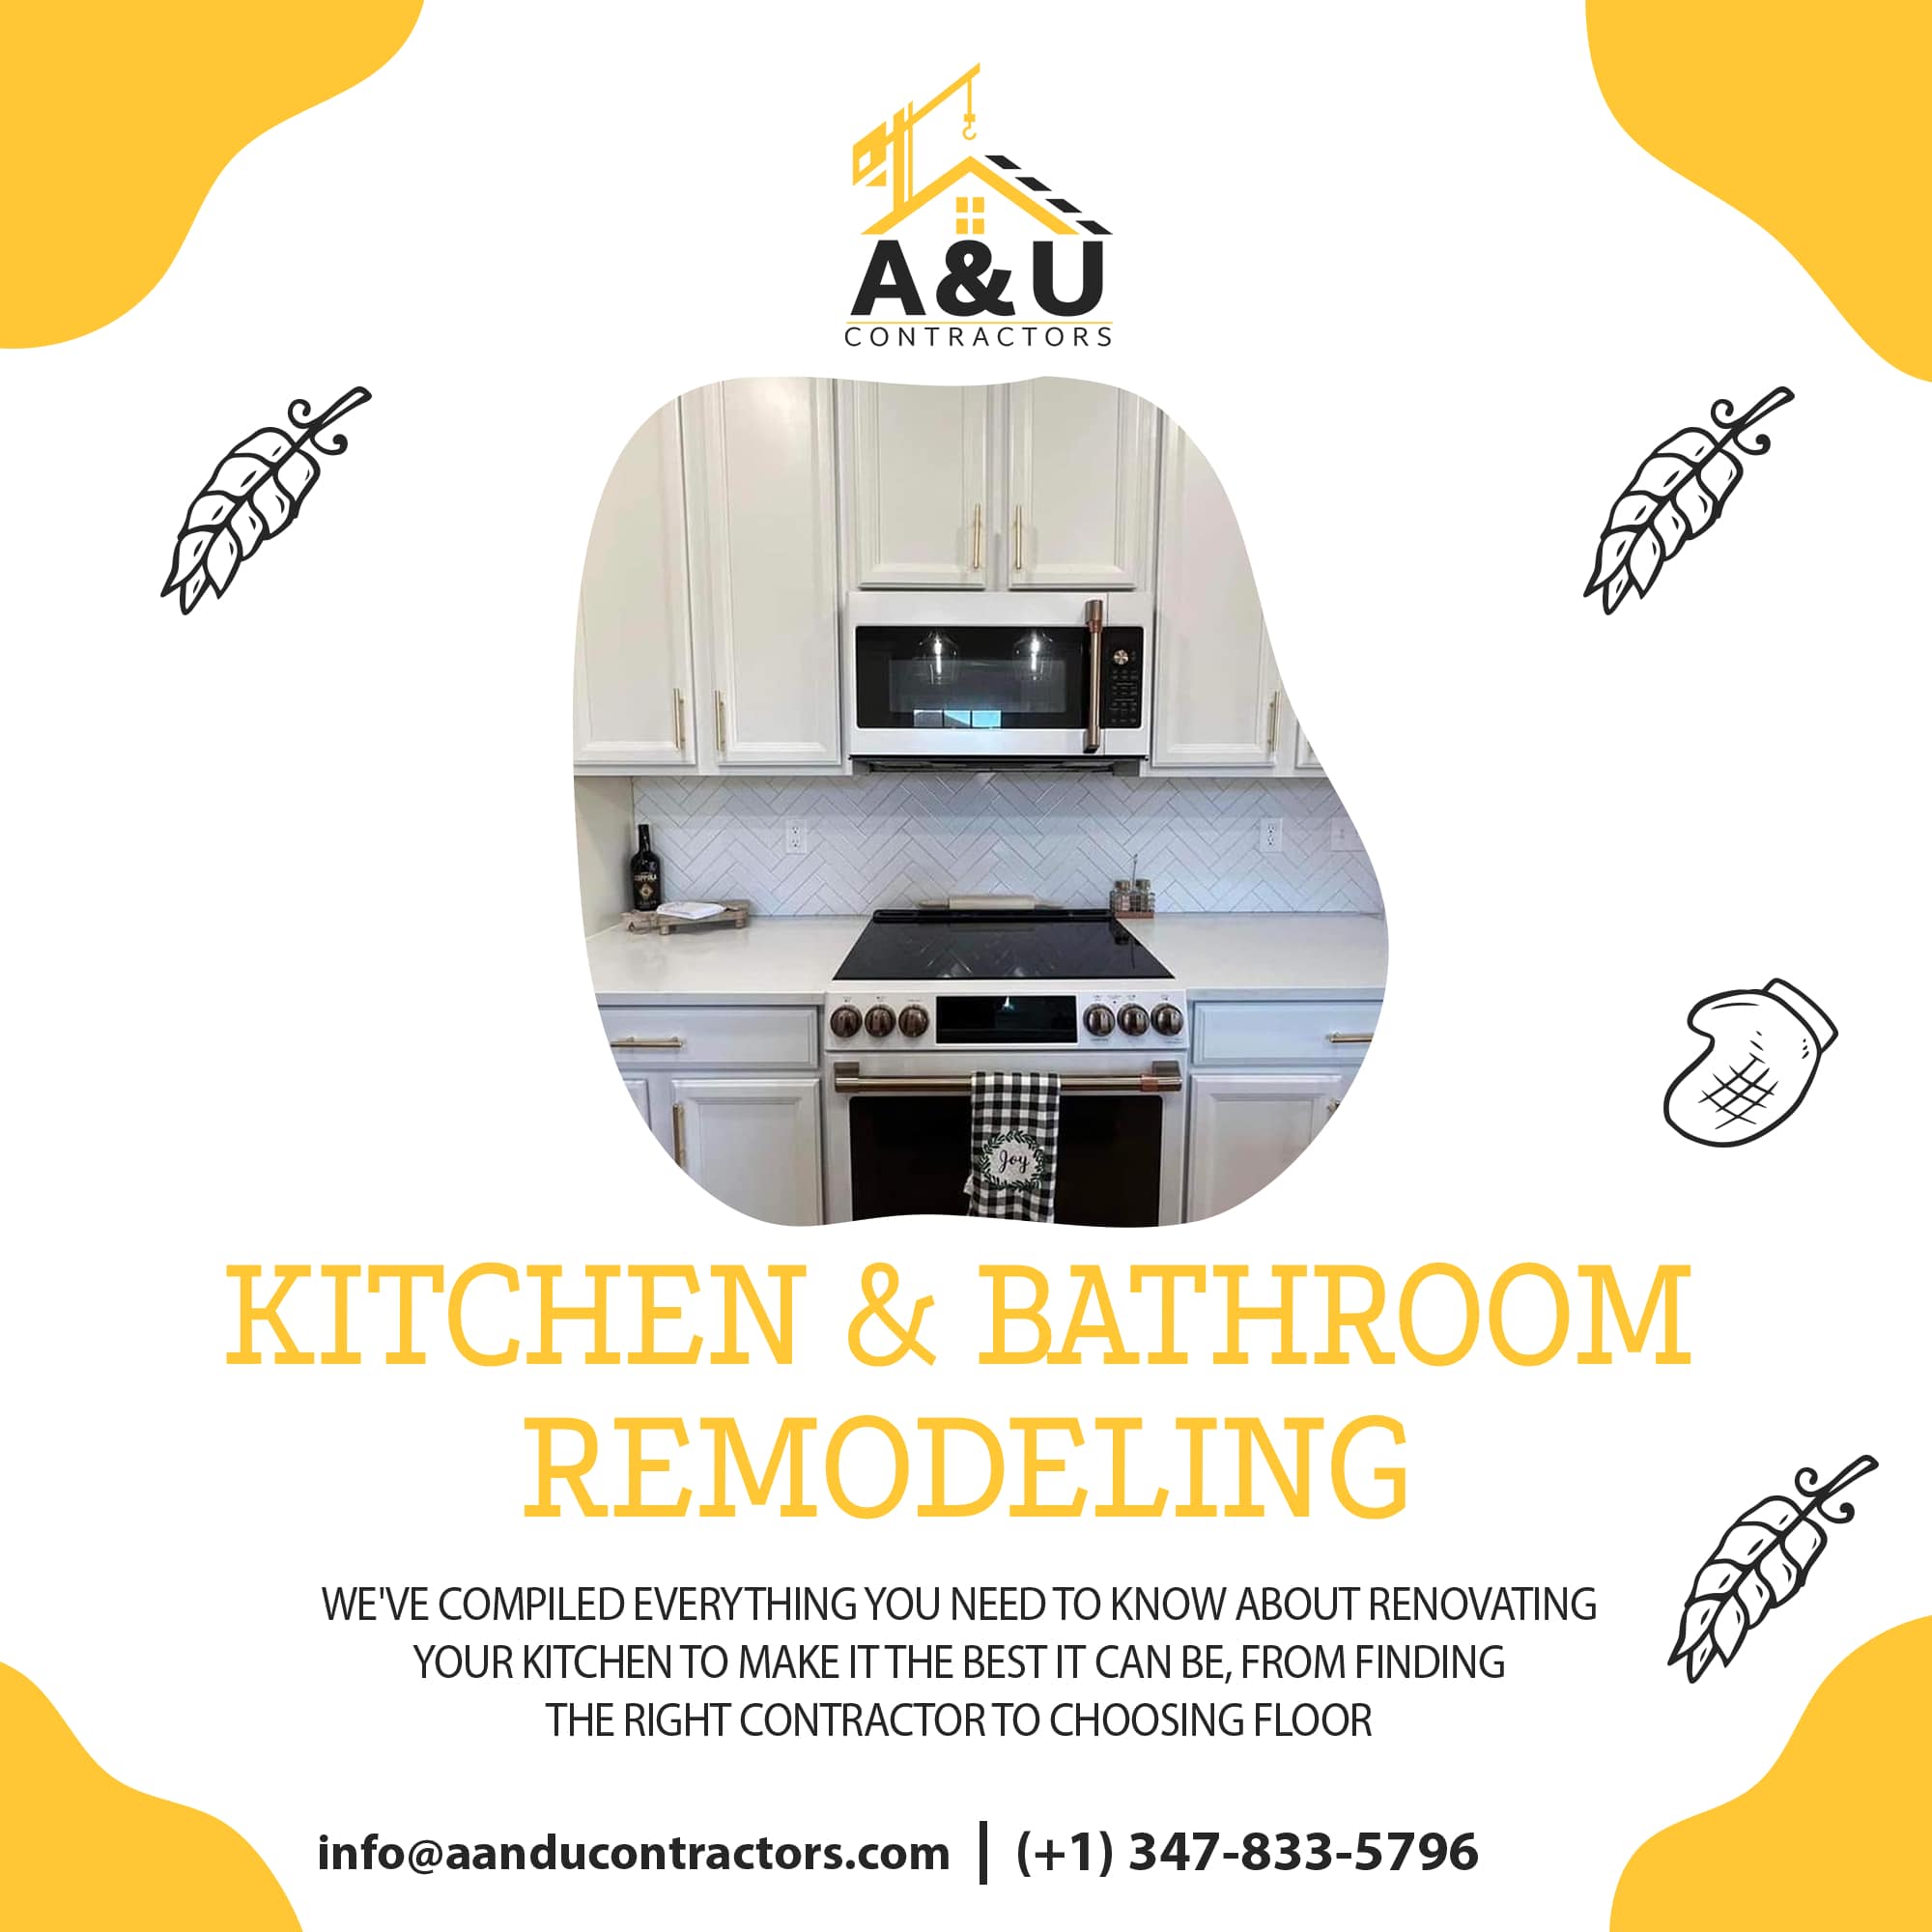 Kitchen remodel, Bathroom renovation, remodeling bathroom cost, kitchen design cost, nyc staten island, Staten Island, New York, Queens, NY, Brooklyn, NY, and Manhattan, NY.